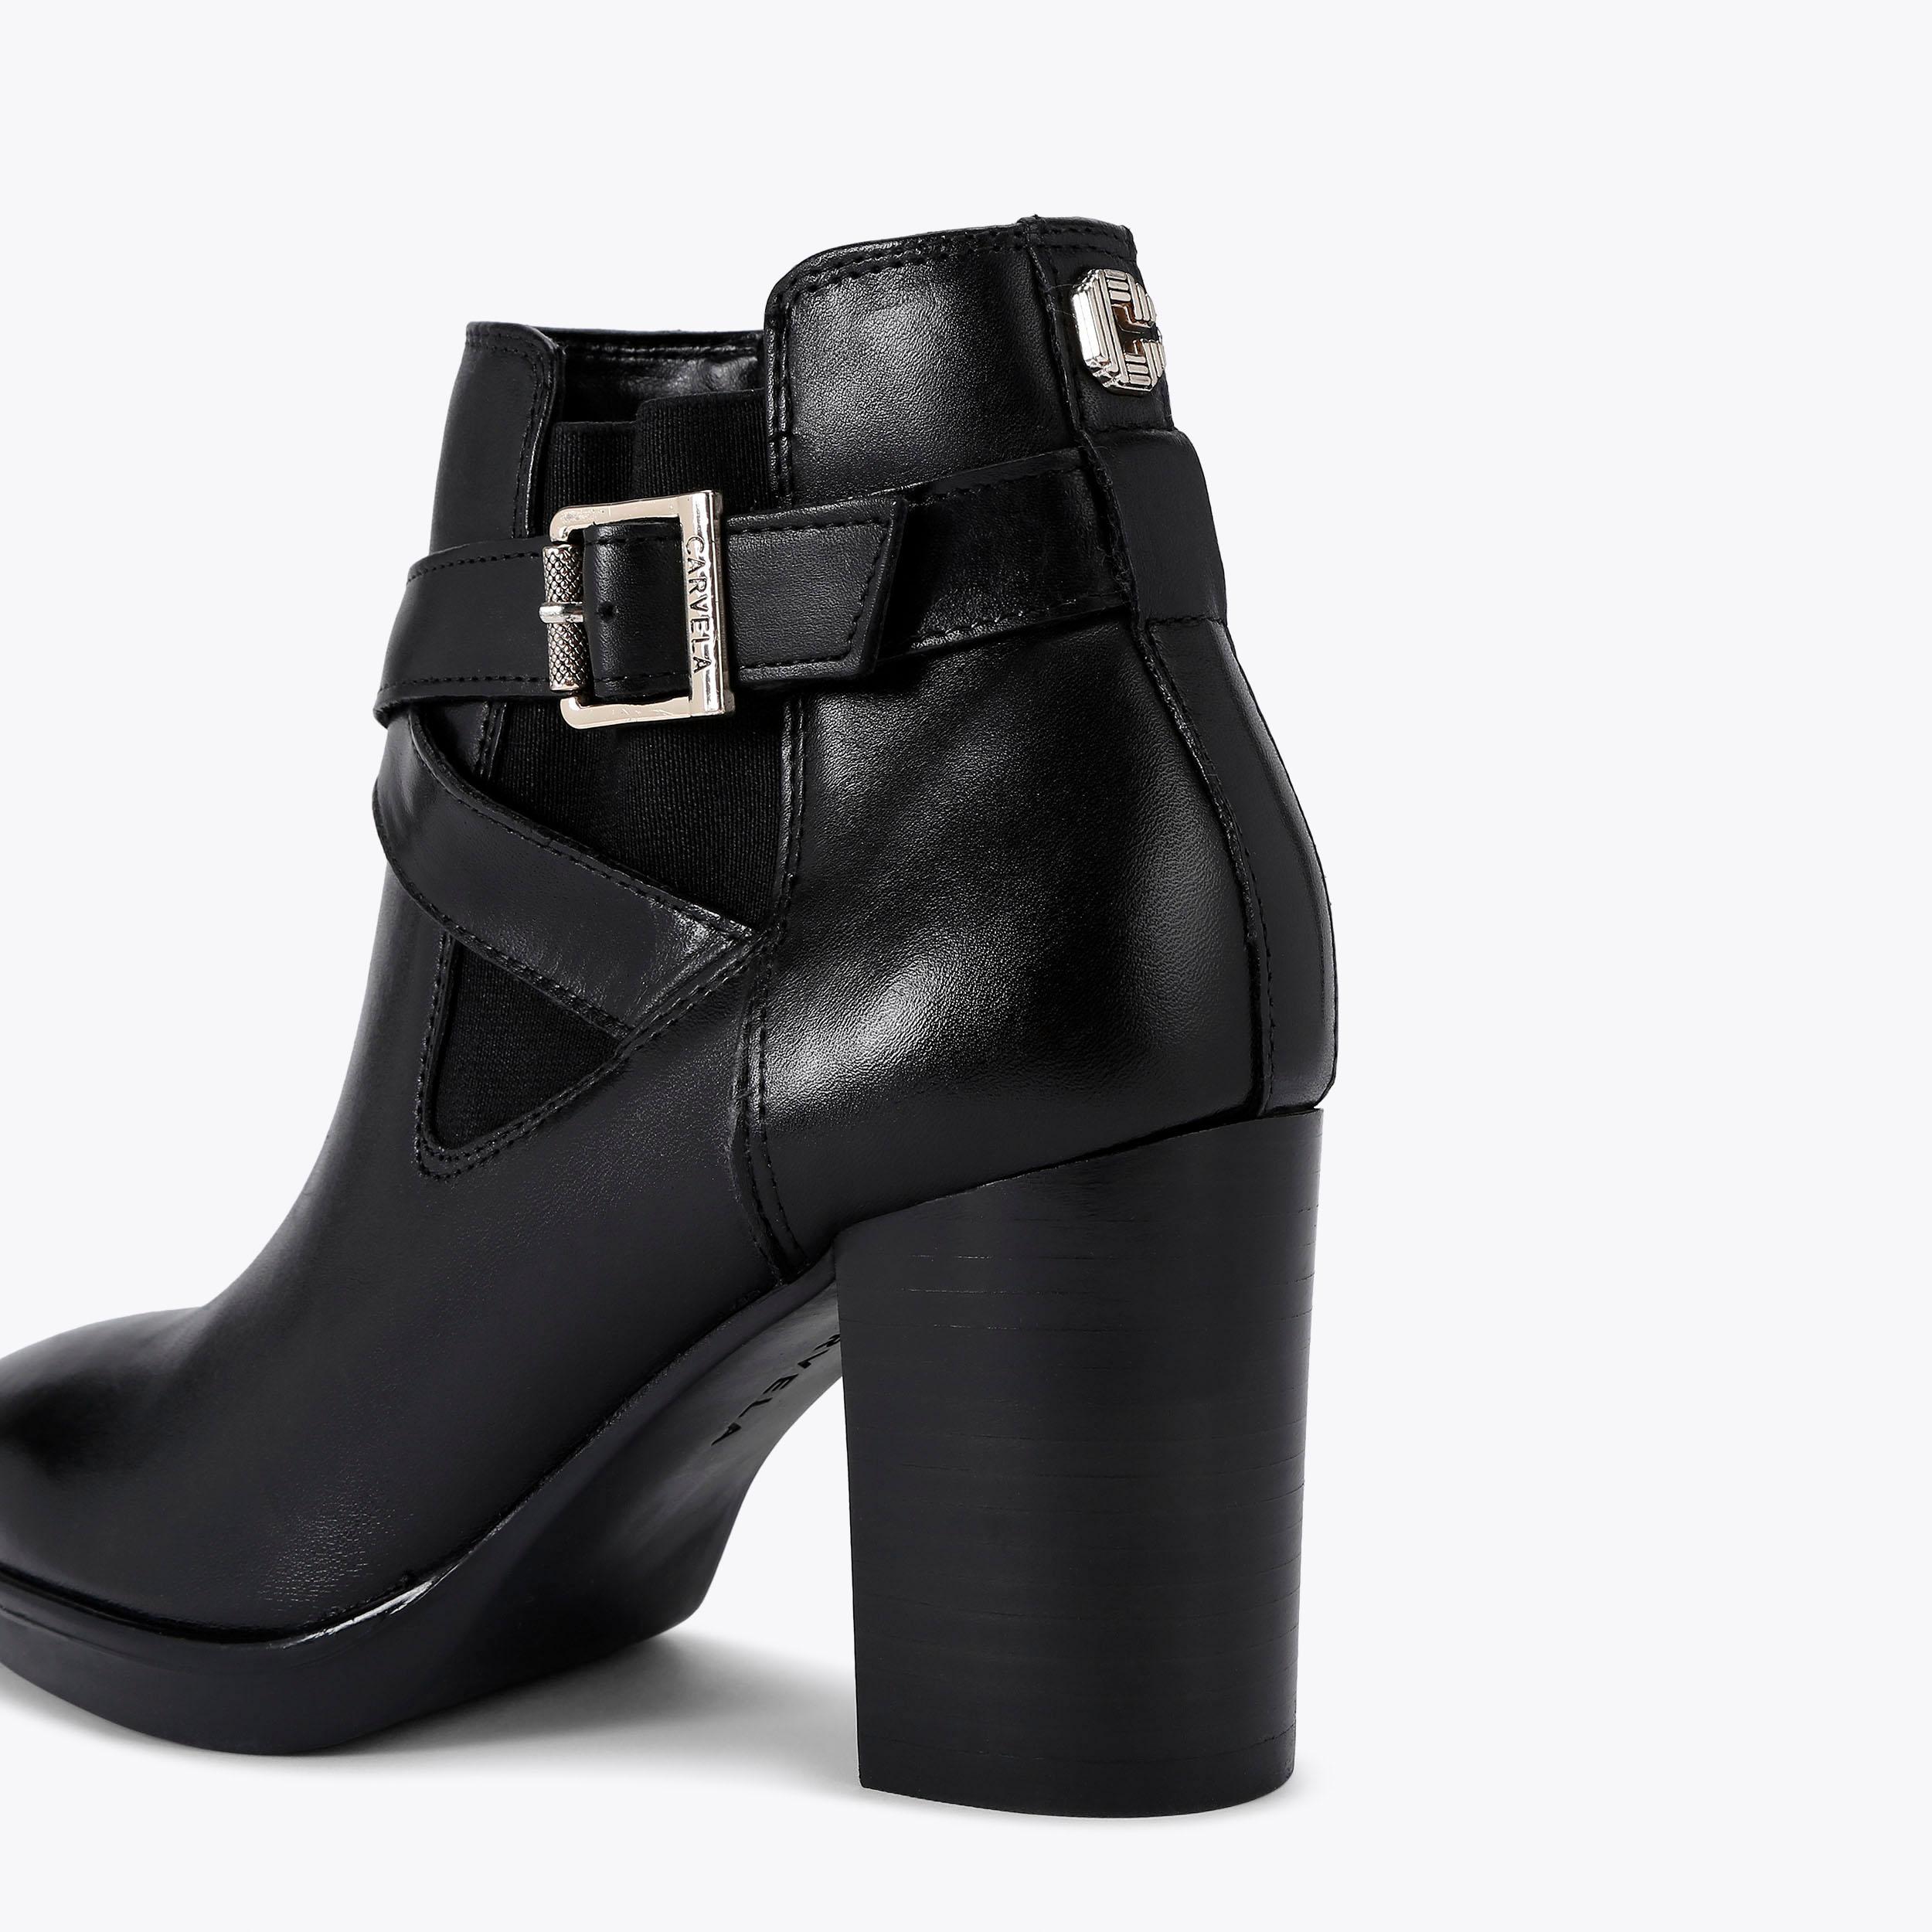 SILVER 2 Black Leather Heeled Ankle Boot by CARVELA